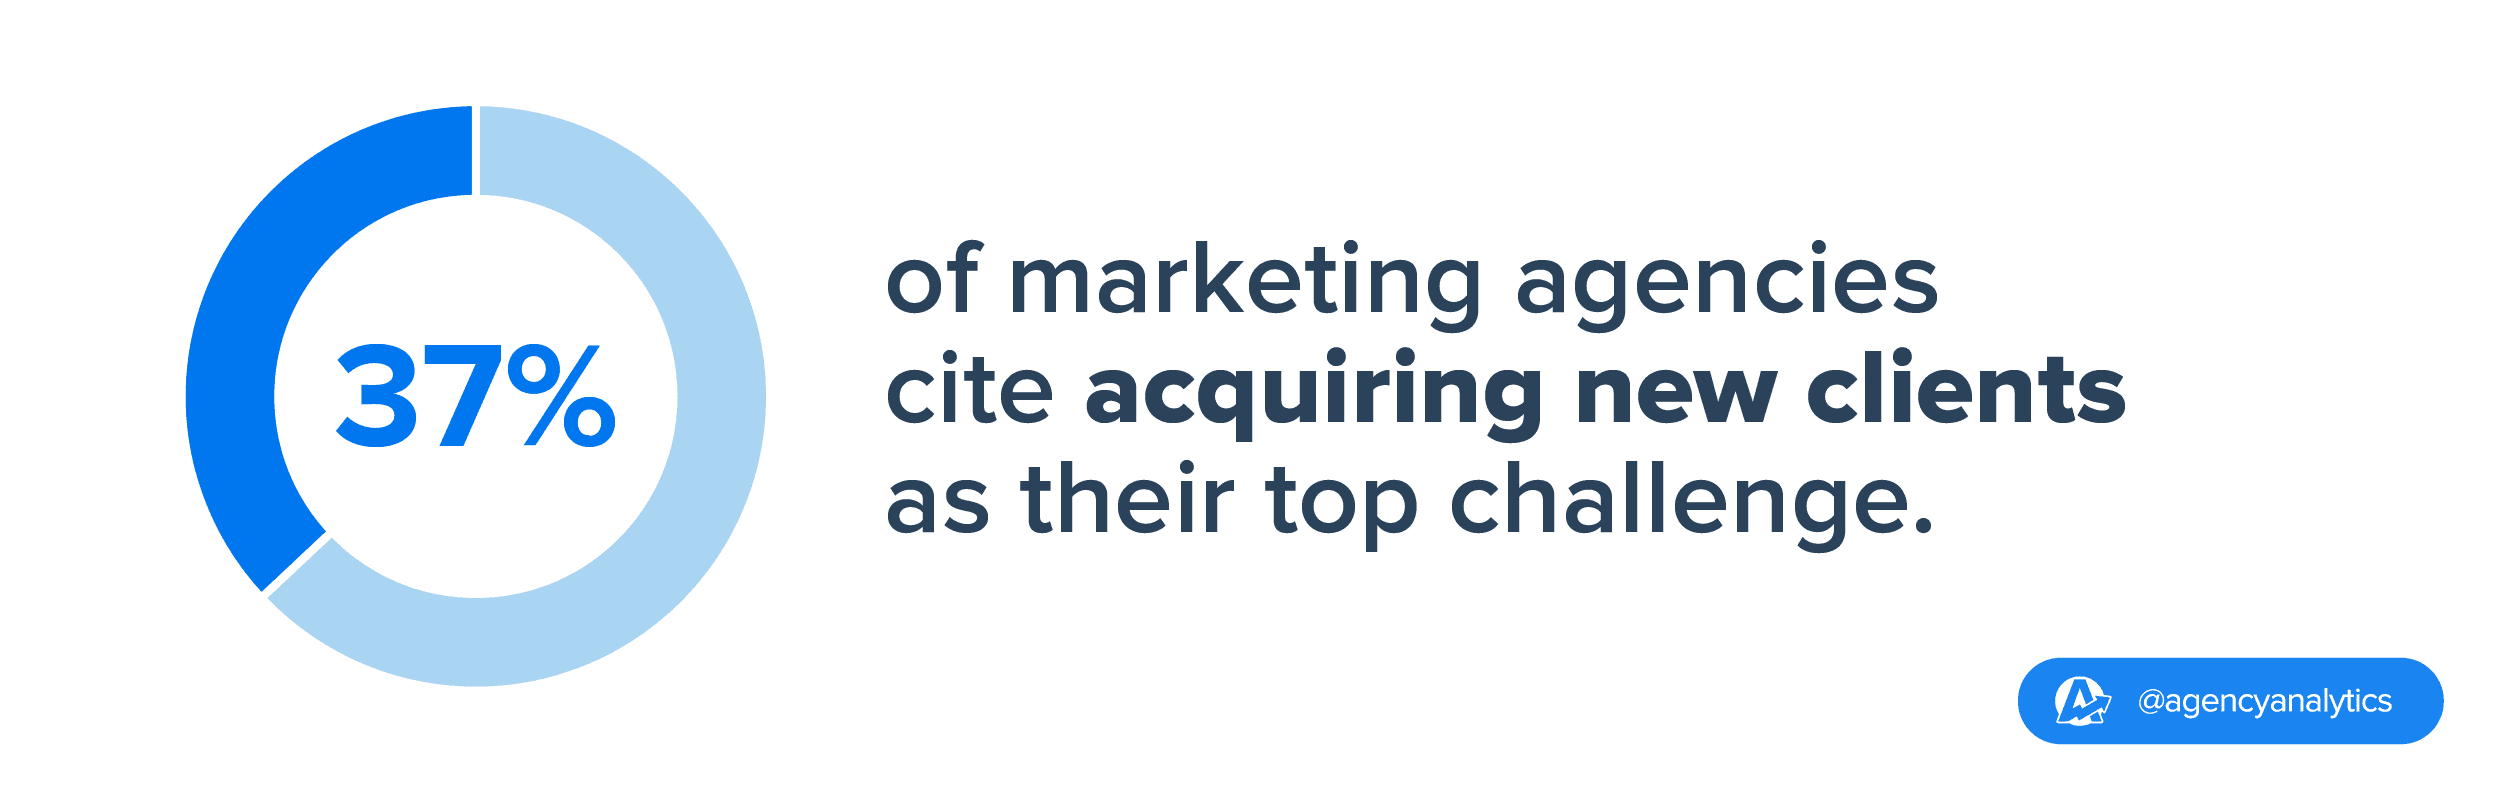 #1 Challenge Facing Marketing Agencies Today is Client Acquisition